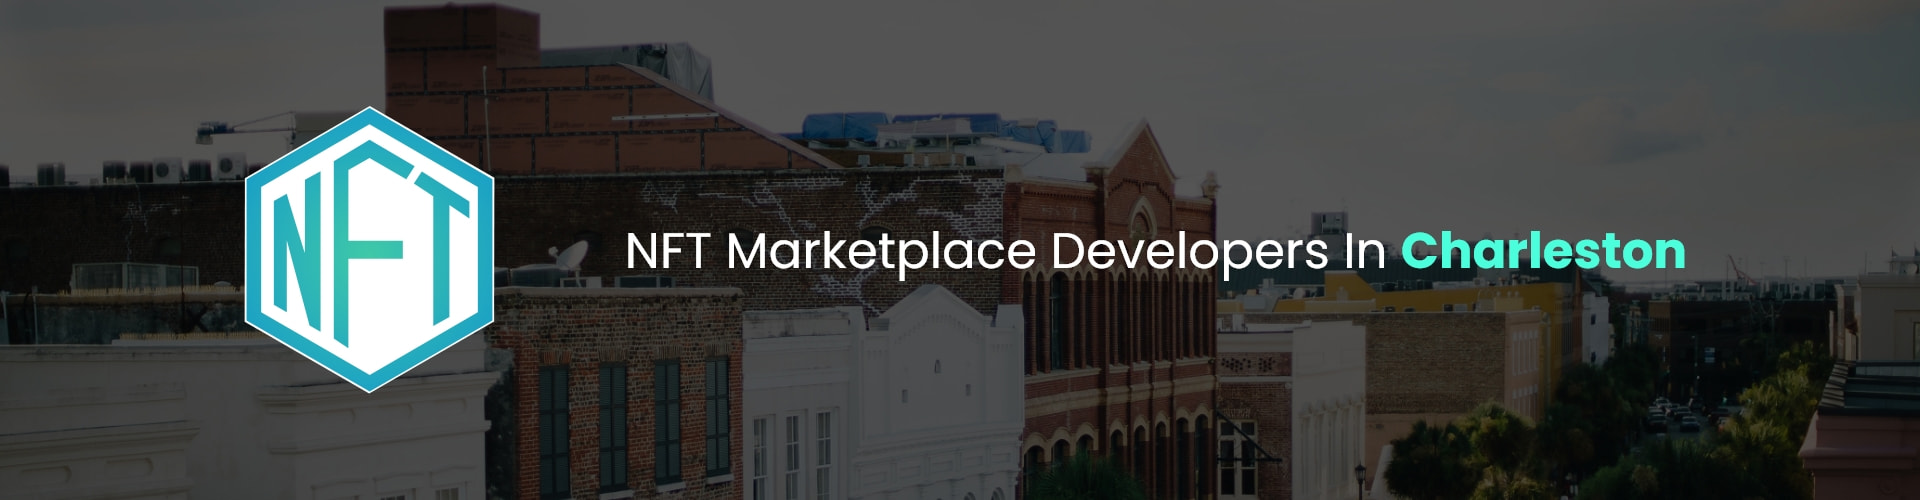 hire nft marketplace developers in charleston